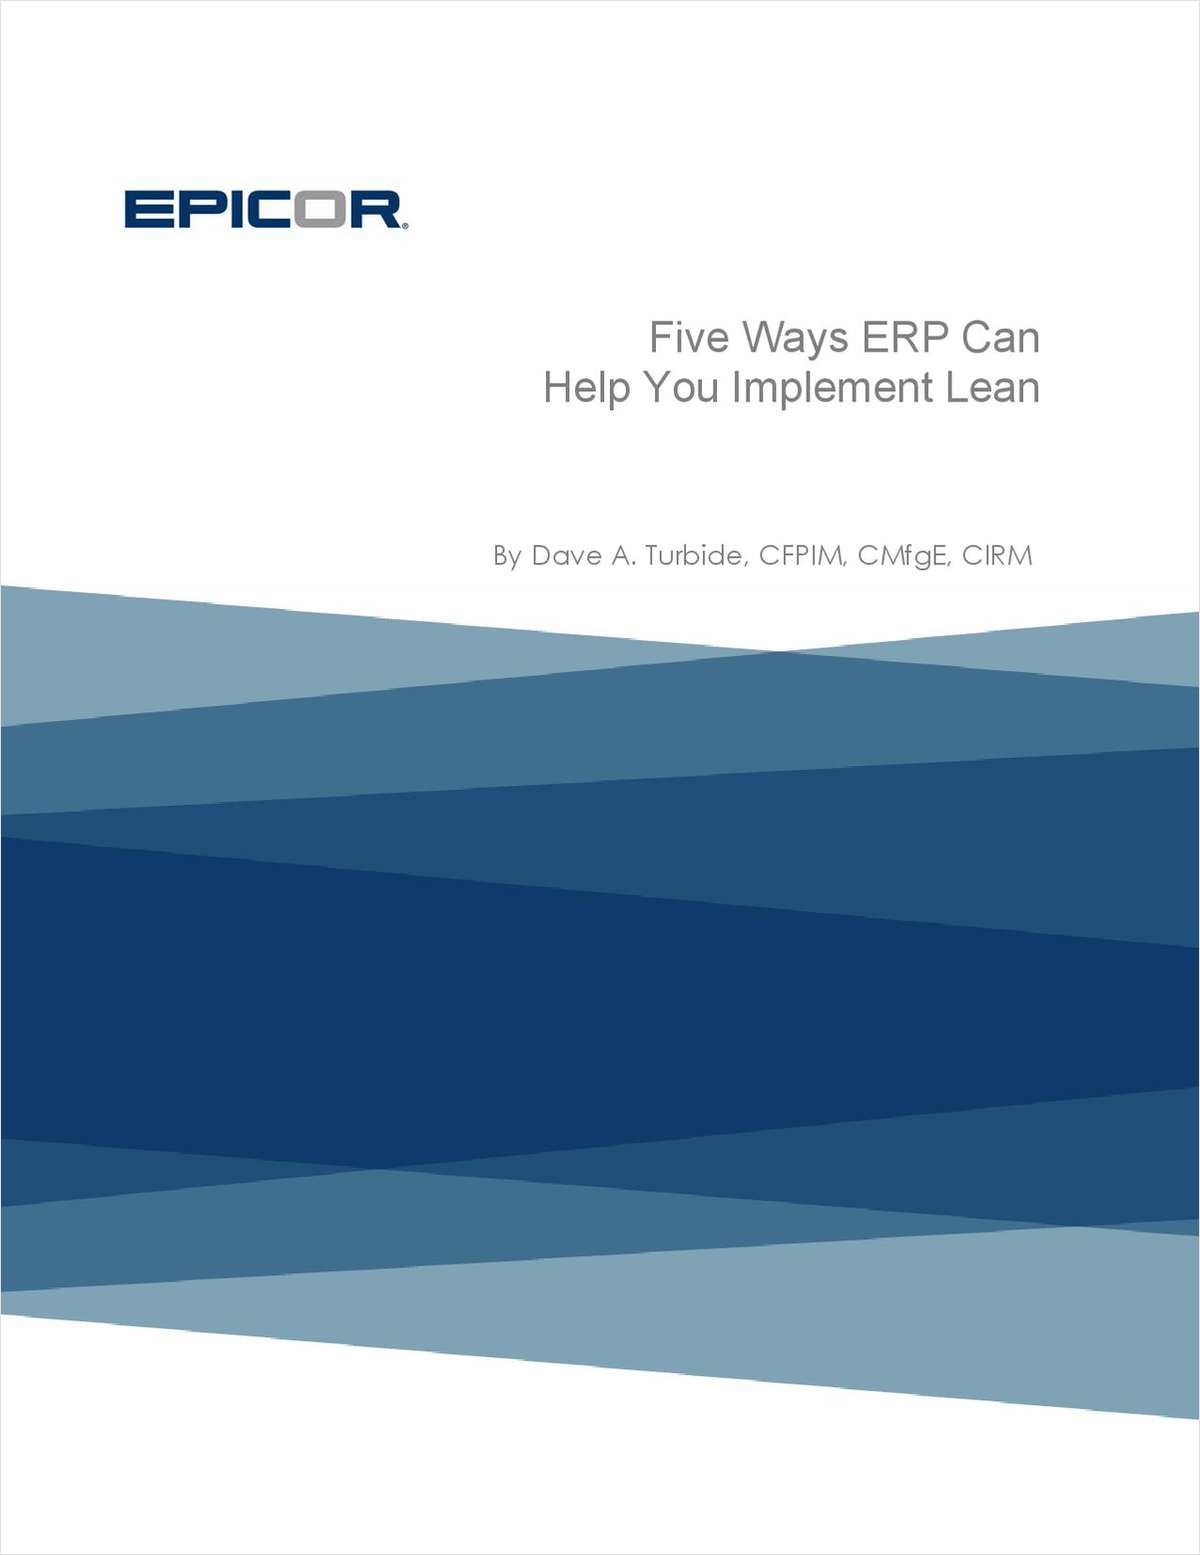 Five Ways ERP Can Help You Implement Lean